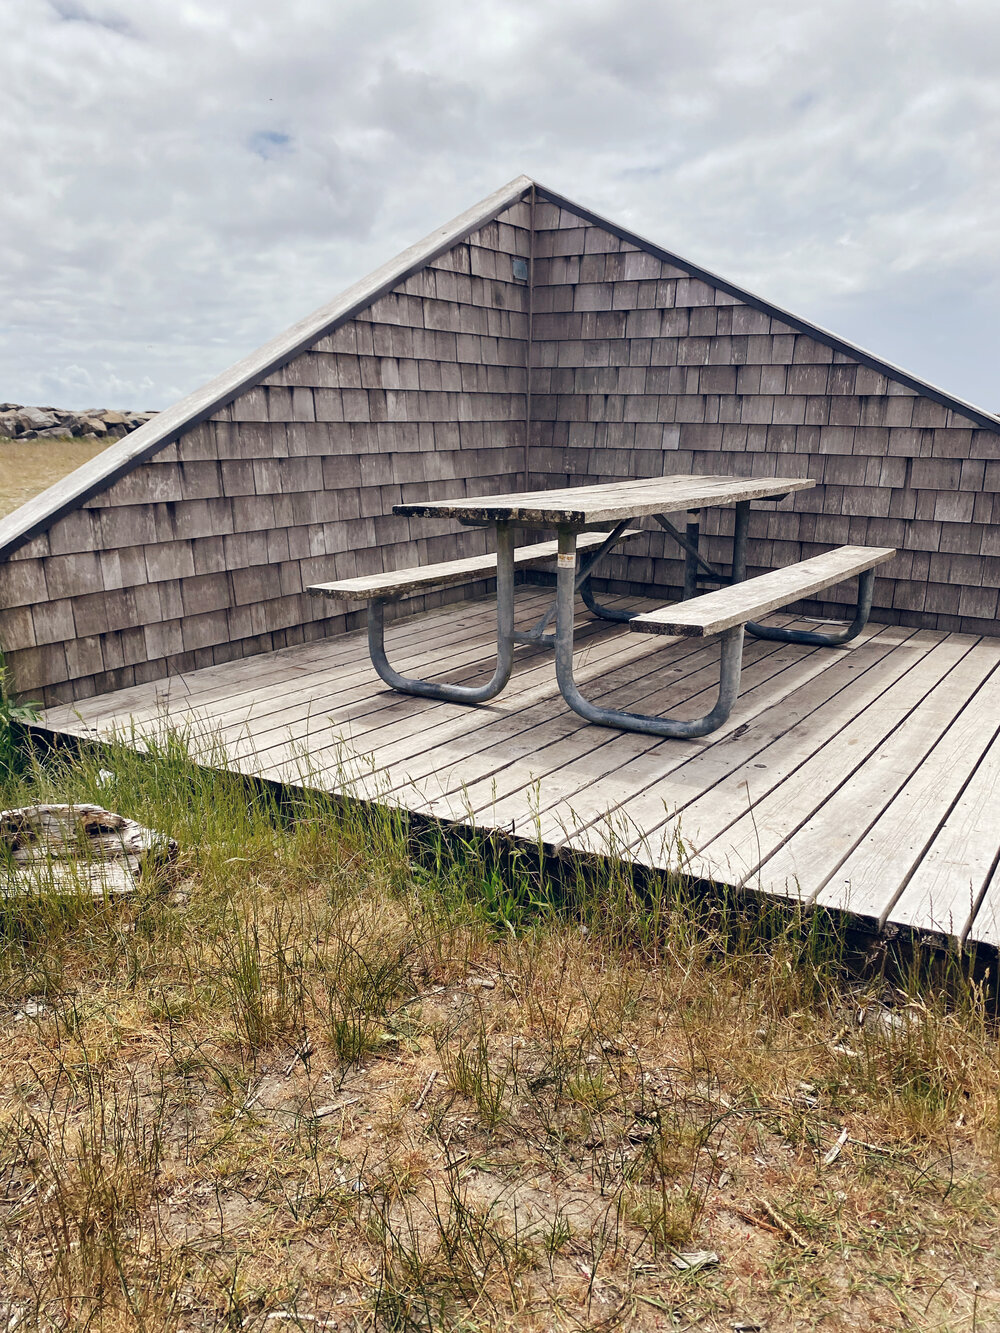 Picnic Tables with a Windbreak at Cape Disappointment State Park - Full Review